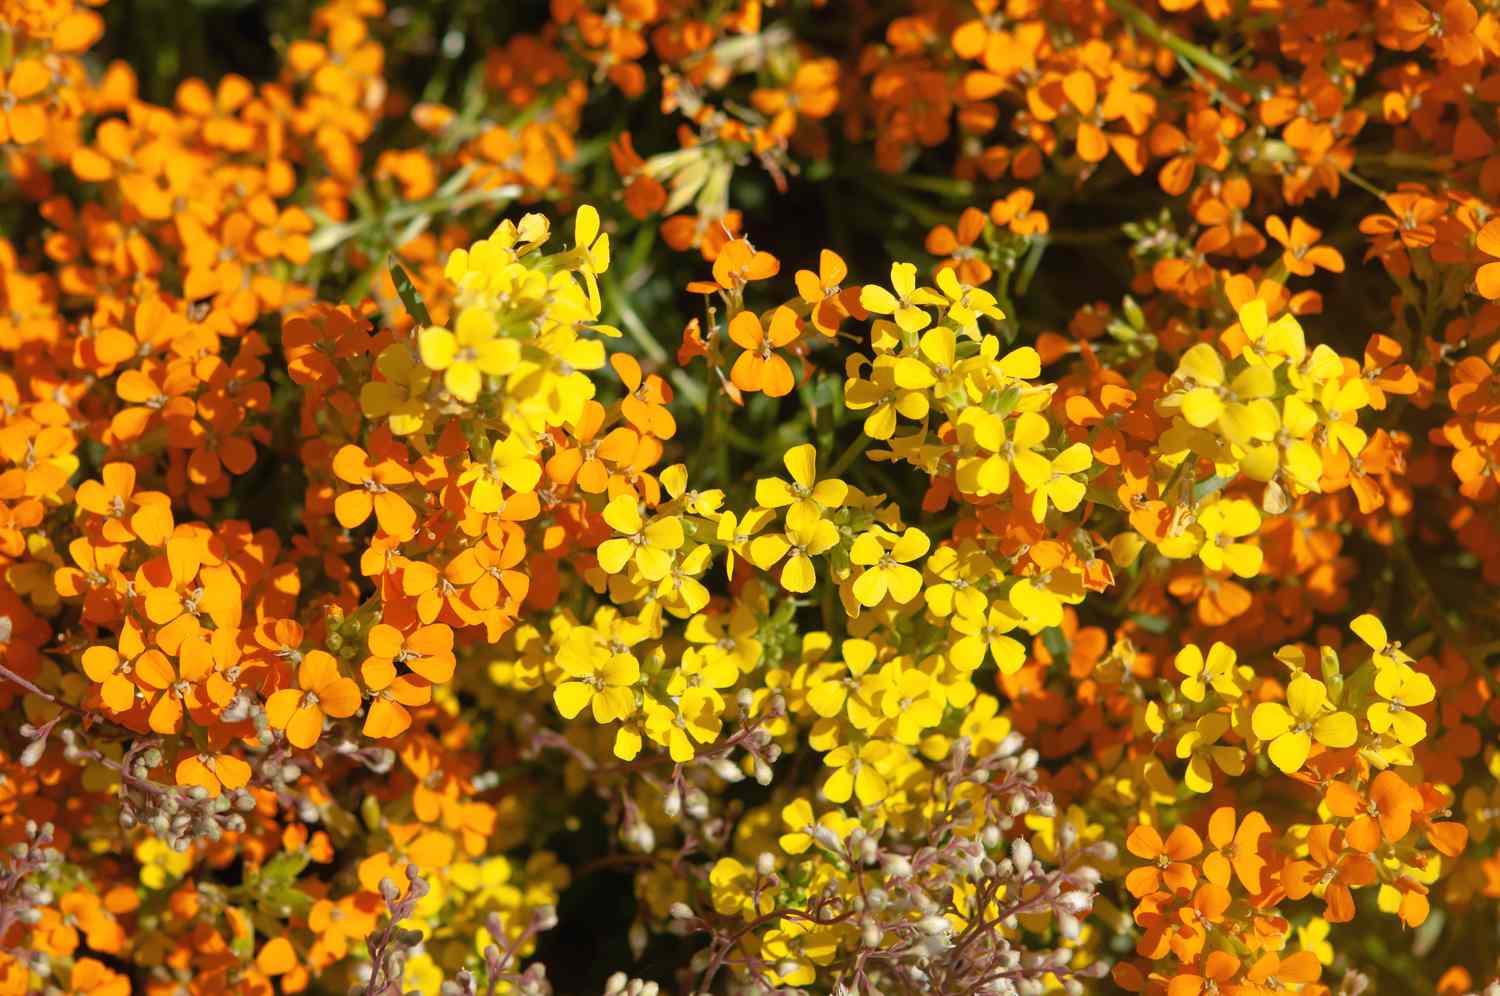 Altgold wallflower plant with yellow and orange flowers in sunlight